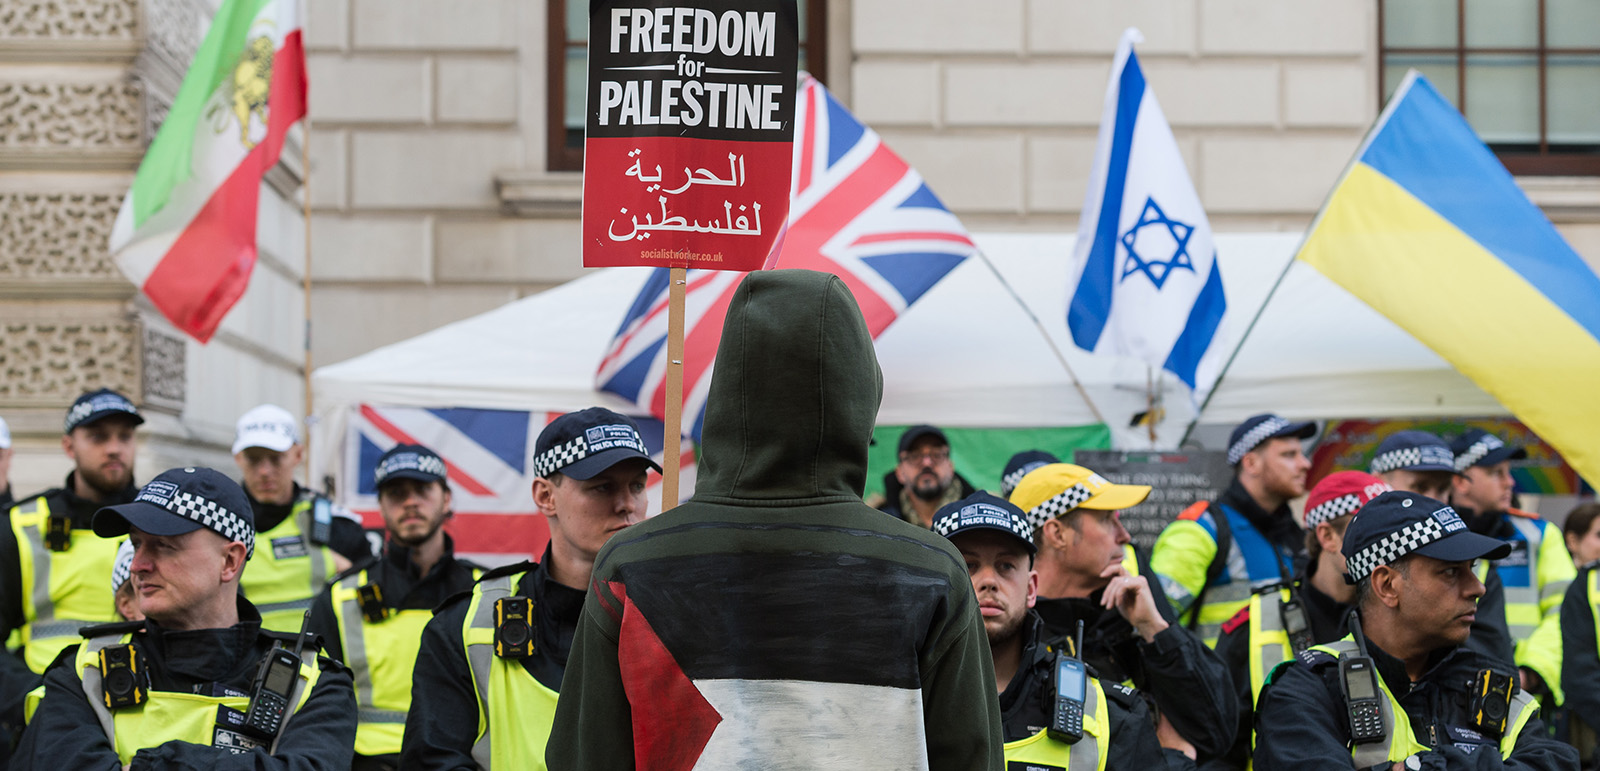 Police officers stand guard between a pro-Israel counter demonstration during the Palestine solidarity march in London, organised to demand an end to Israeli airstrikes on the Gaza Strip. Photography by Wiktor Szymanowicz/Future Publishing via Getty Images